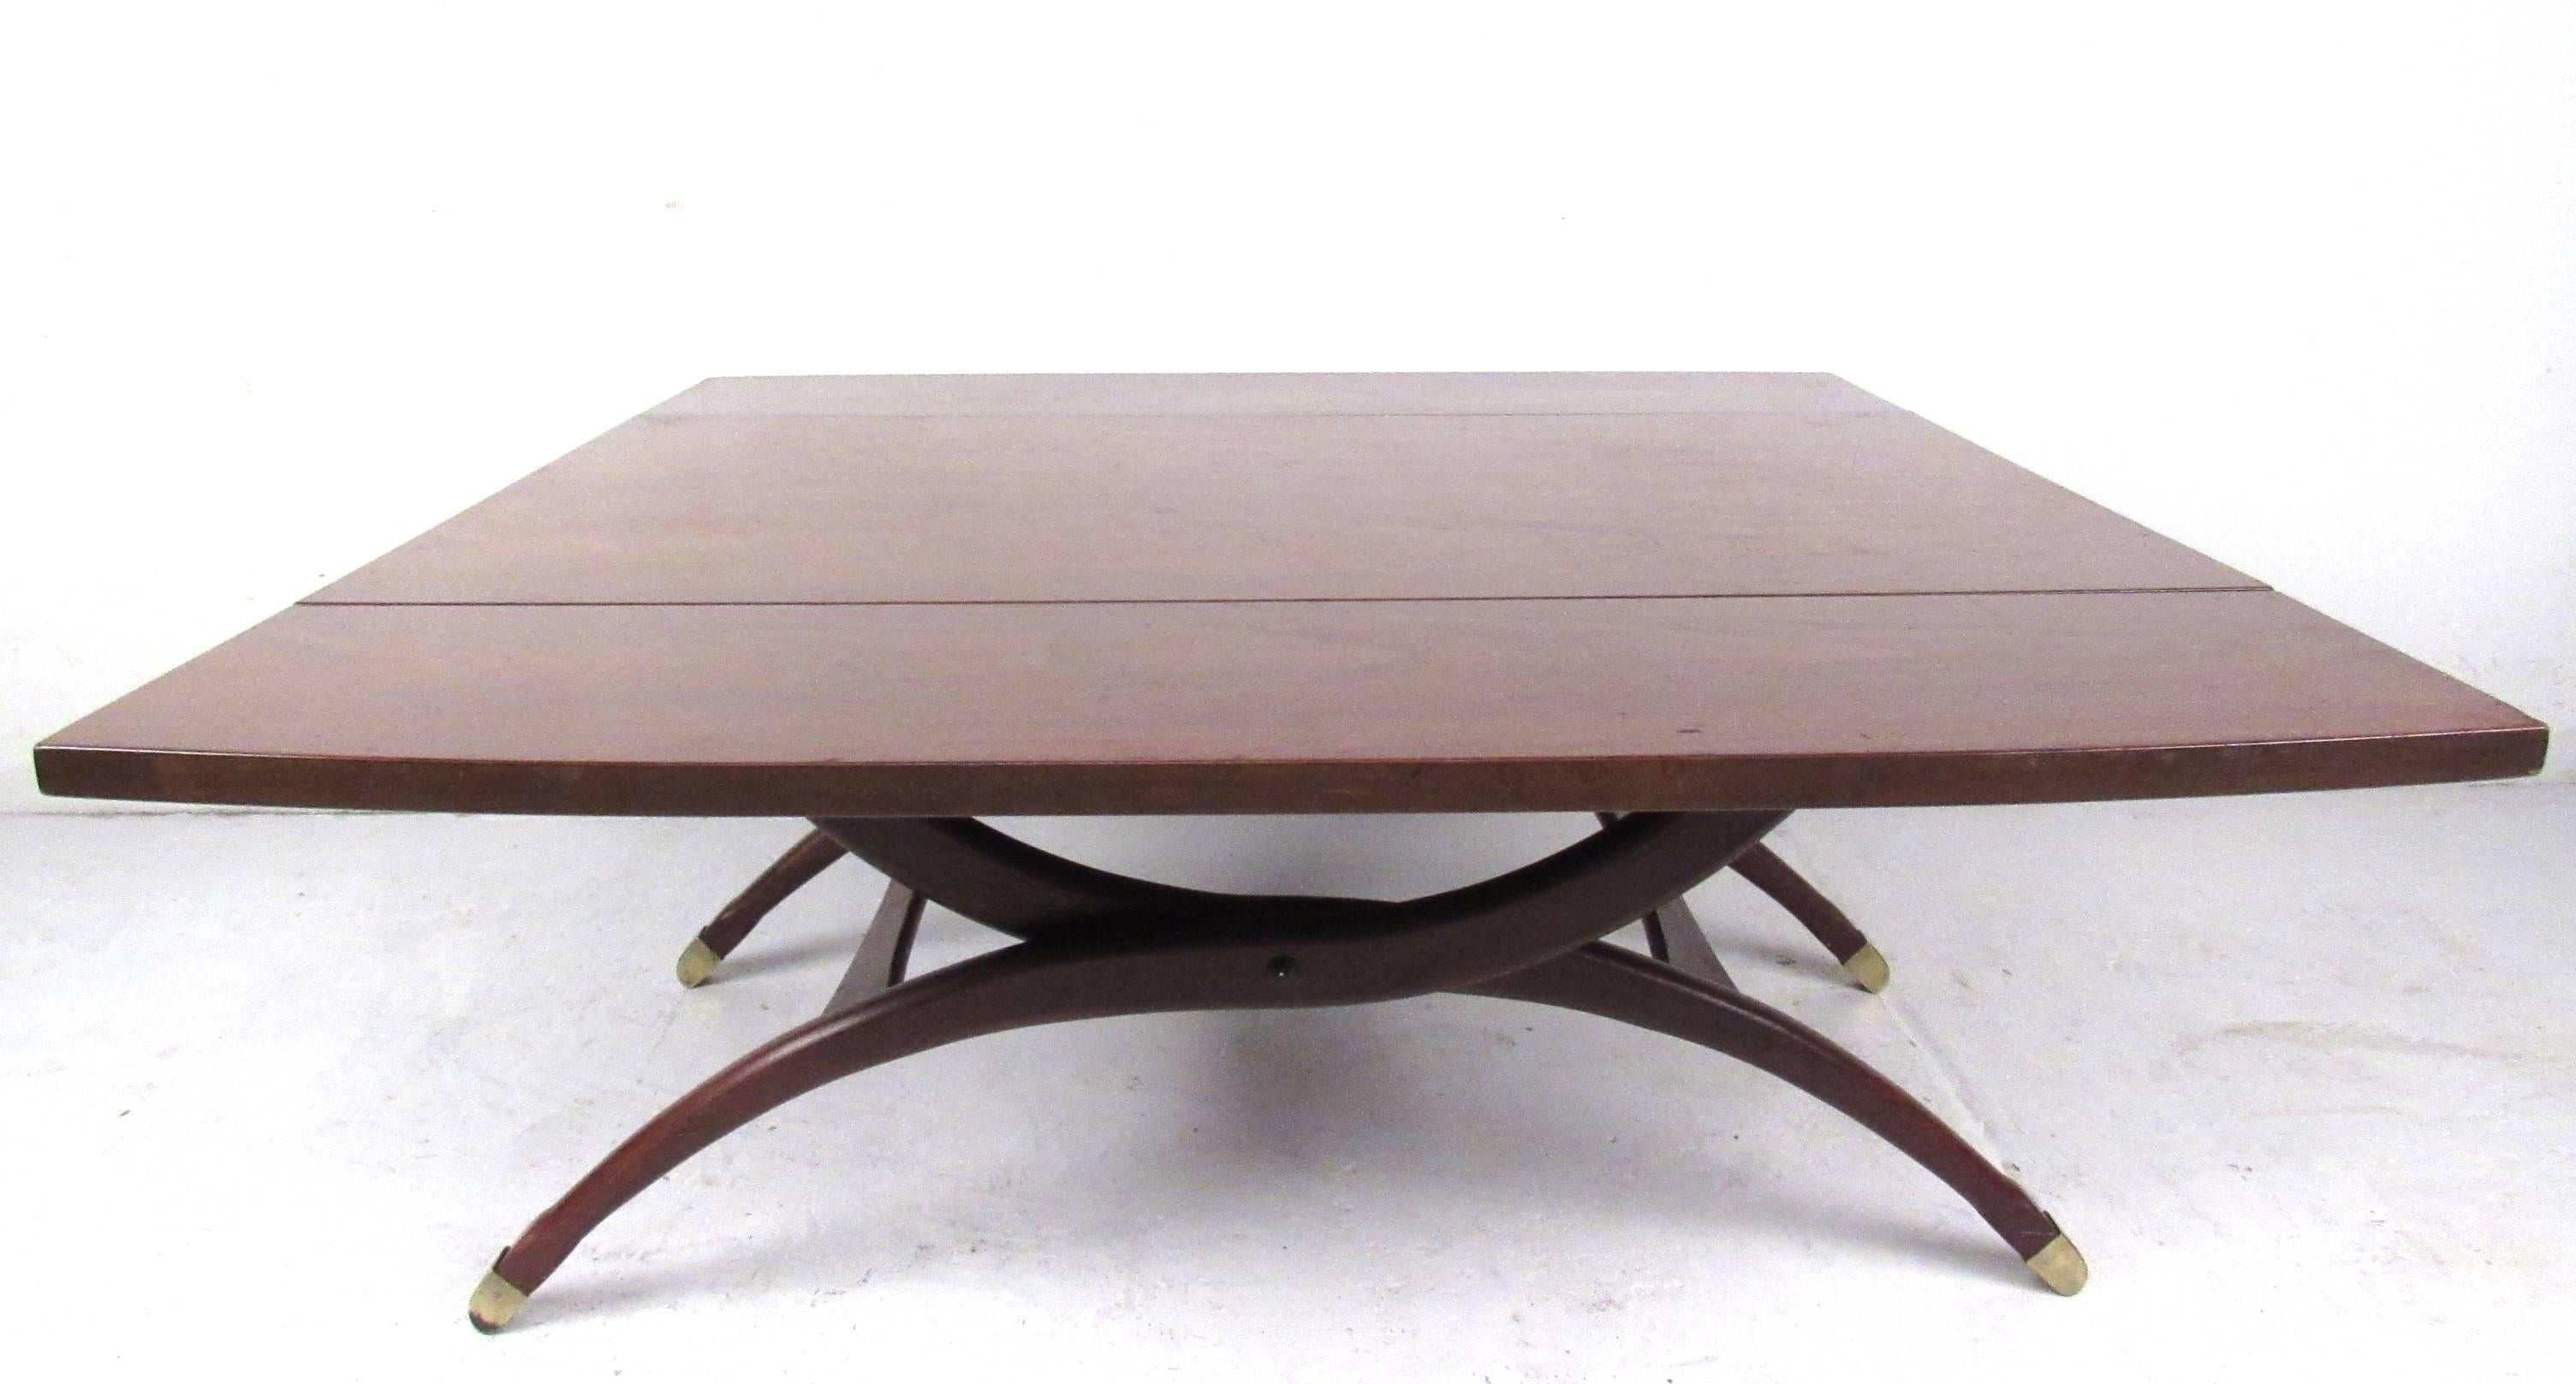 This unique vintage drop-leaf table features a well crafted spring action elevator function, switching from coffee table to dining table height. The versatility and style of the piece includes Dual drop leaves (opens to 39w), tapered/curved legs and